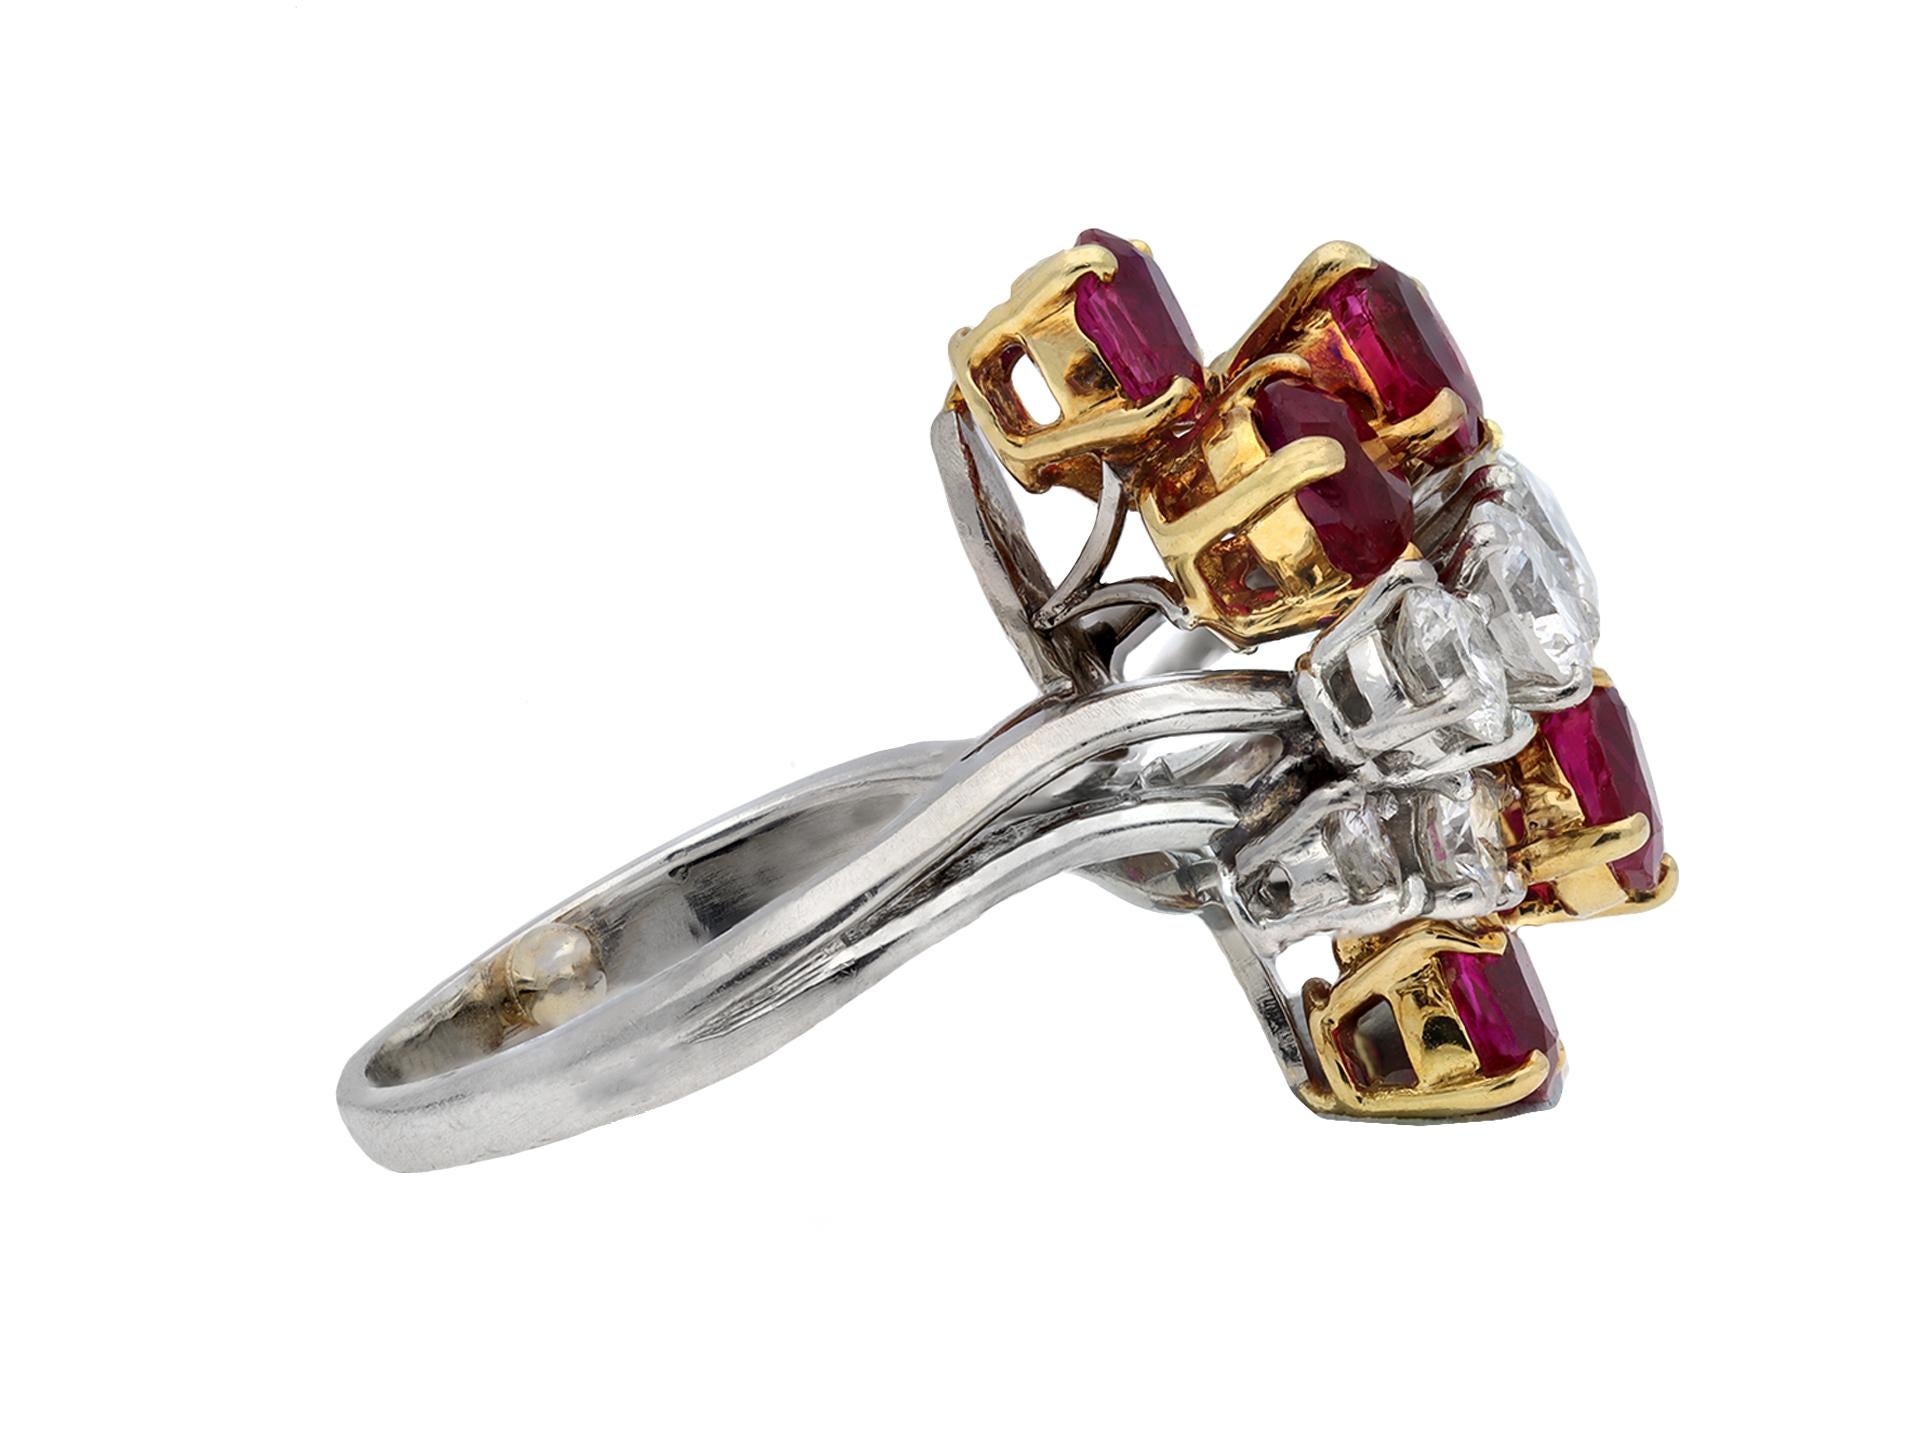 Chaumet Burmese ruby and diamond cluster ring. Set with six oval old cut natural unenhanced Burmese rubies in open back claw settings with a combined approximate weight of 2.50 carats, further set with eight round transitional cut diamonds in open